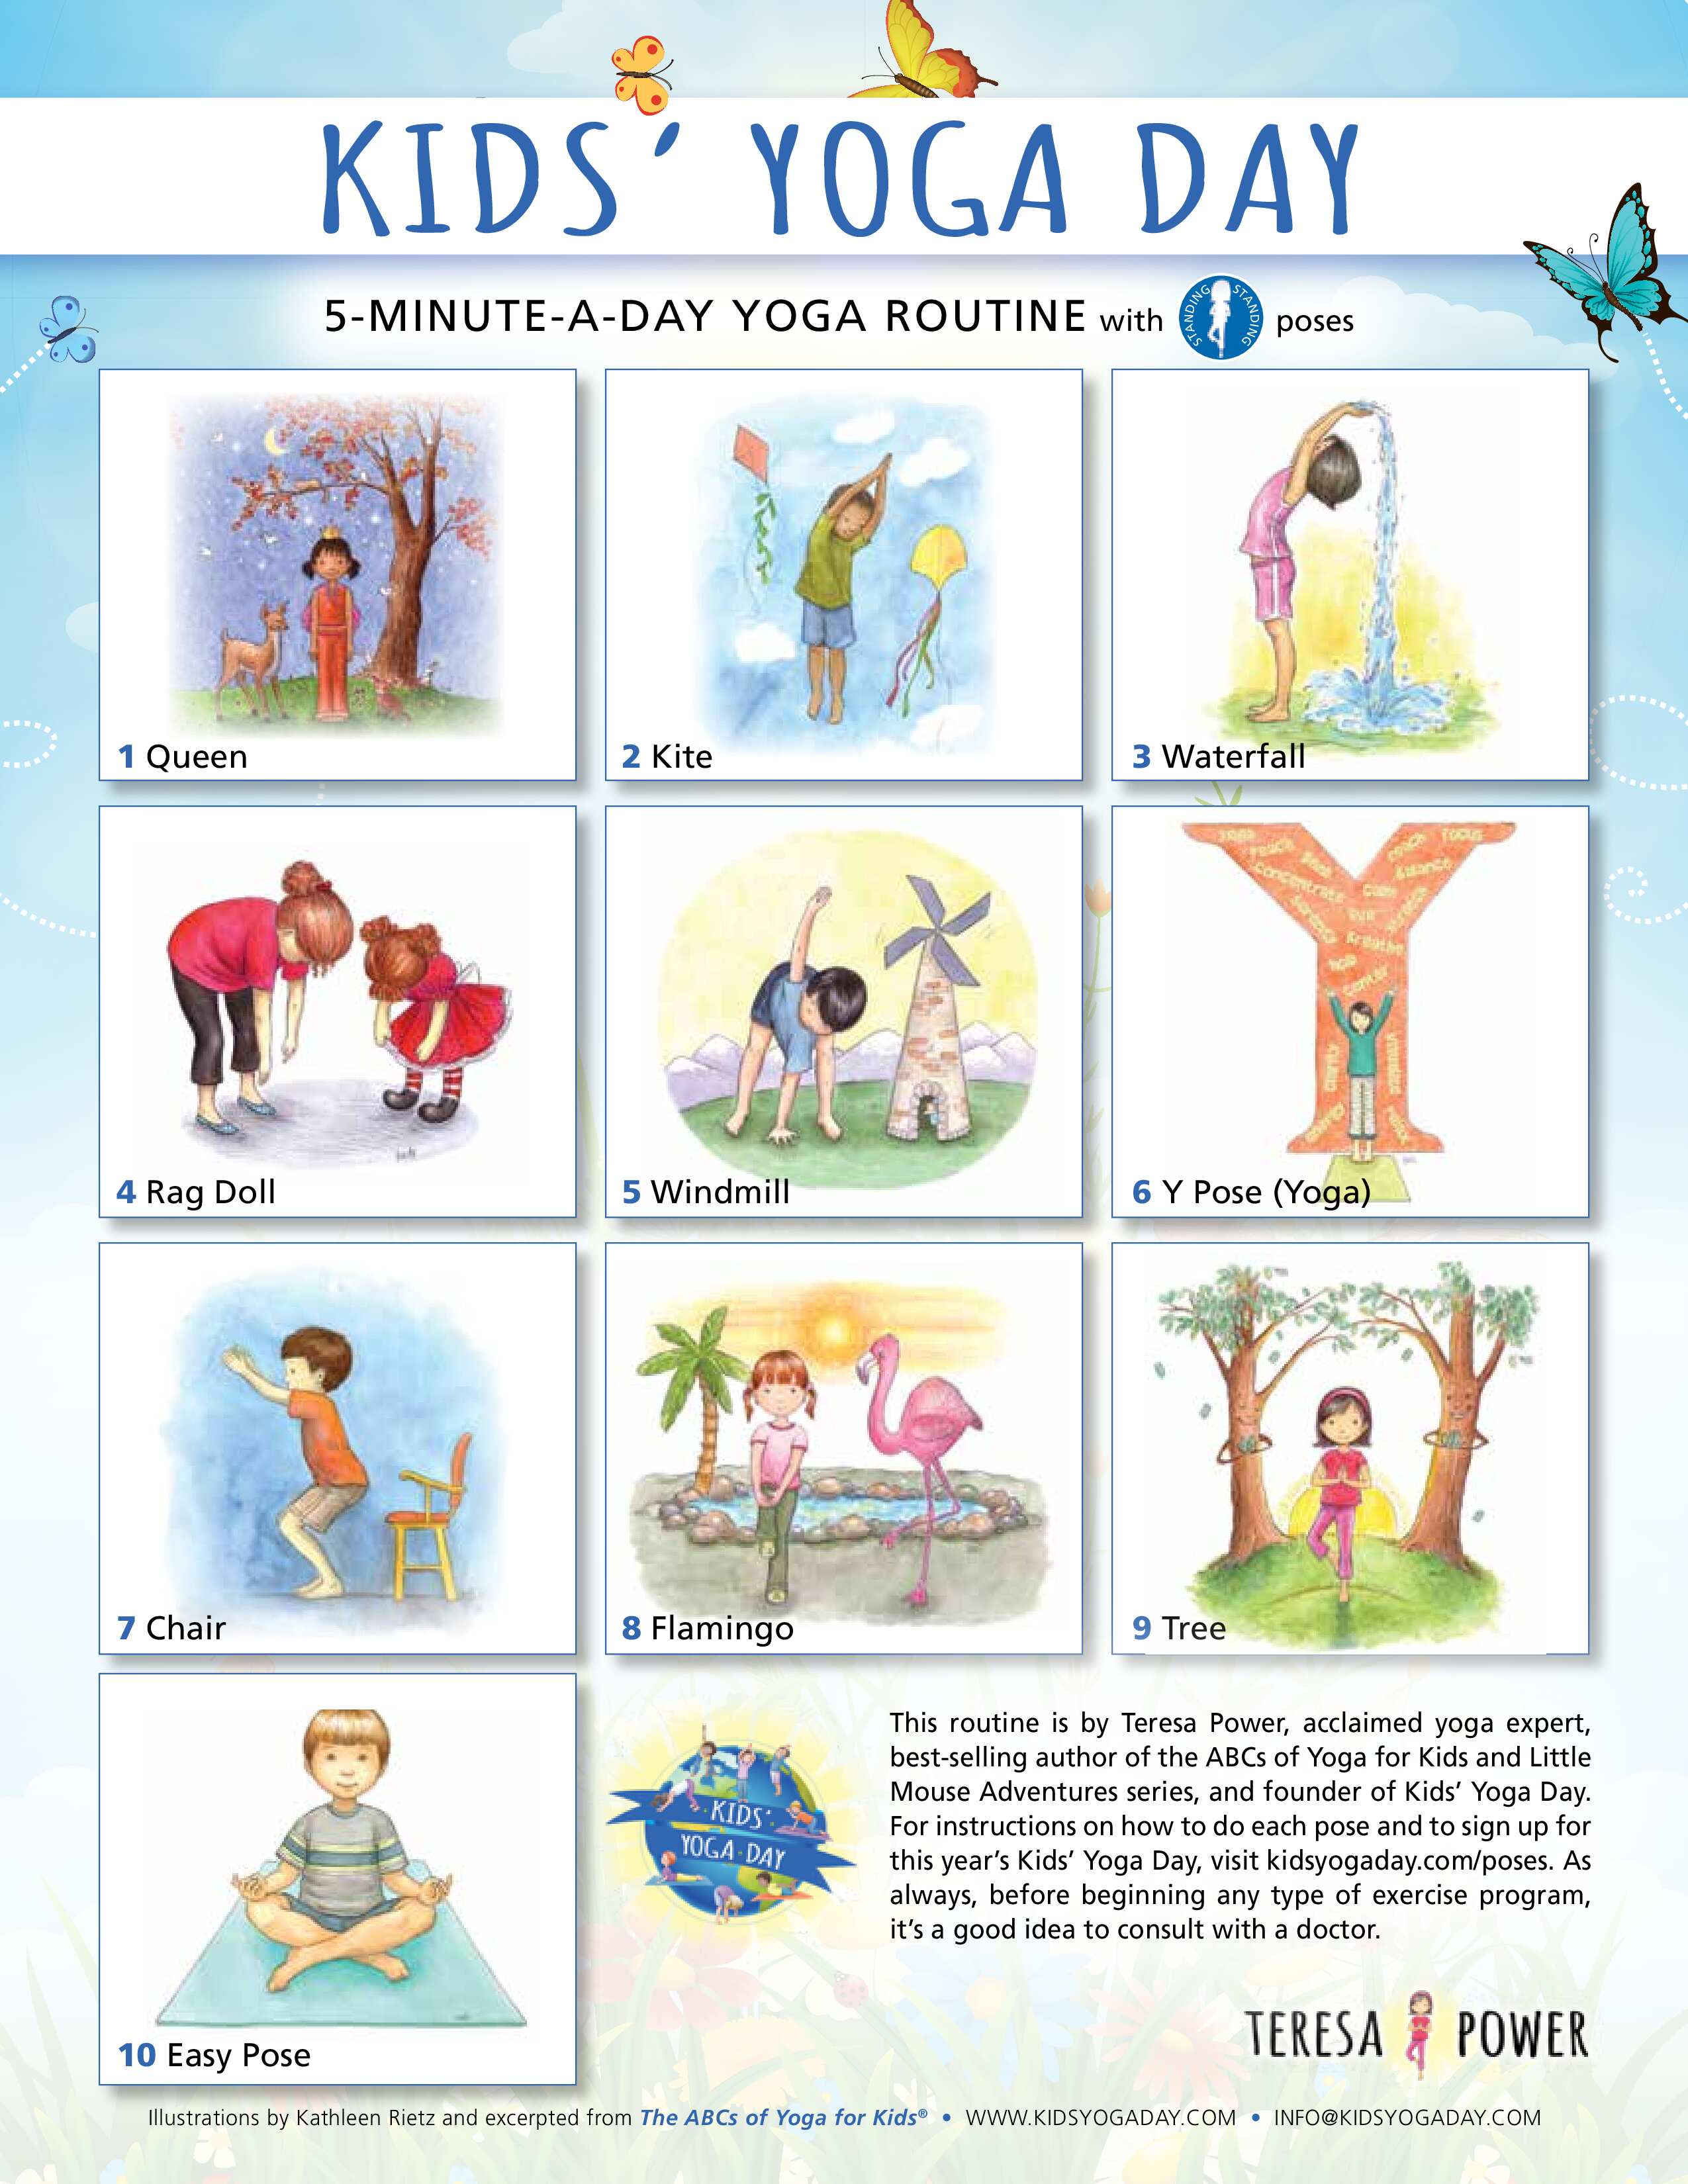 Yoga Poses You Can Do With Your Kids | POPSUGAR Family